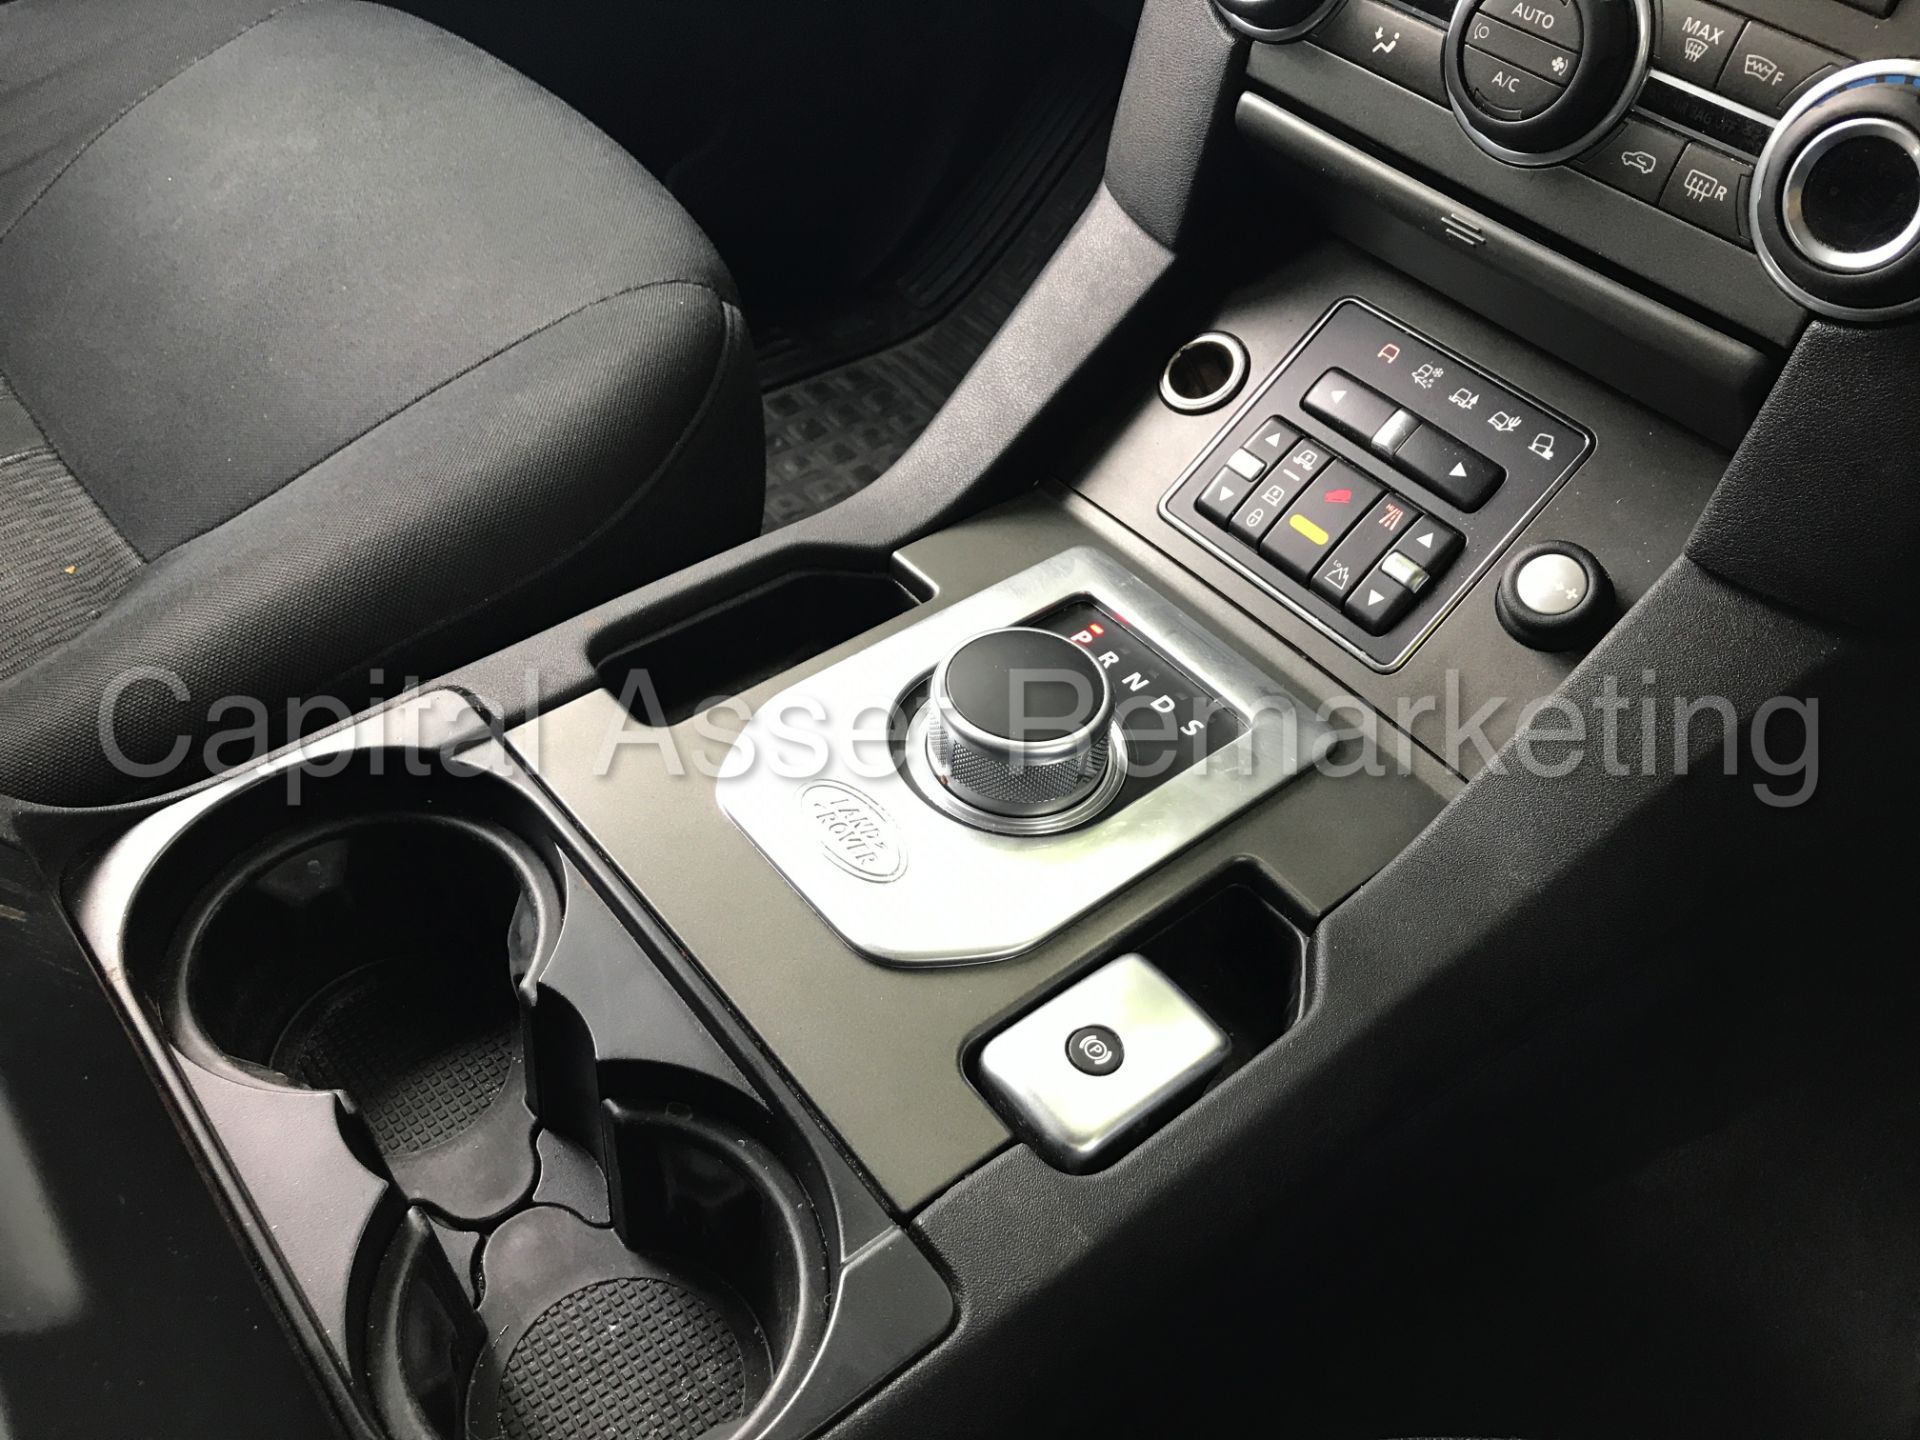 (On sale) LAND ROVER DISCOVERY 4 (2014 MODEL) '3.0 SDV6 -AUTO- 255 BHP - 7 SEATER'(1 OWNER FROM NEW) - Image 36 of 42